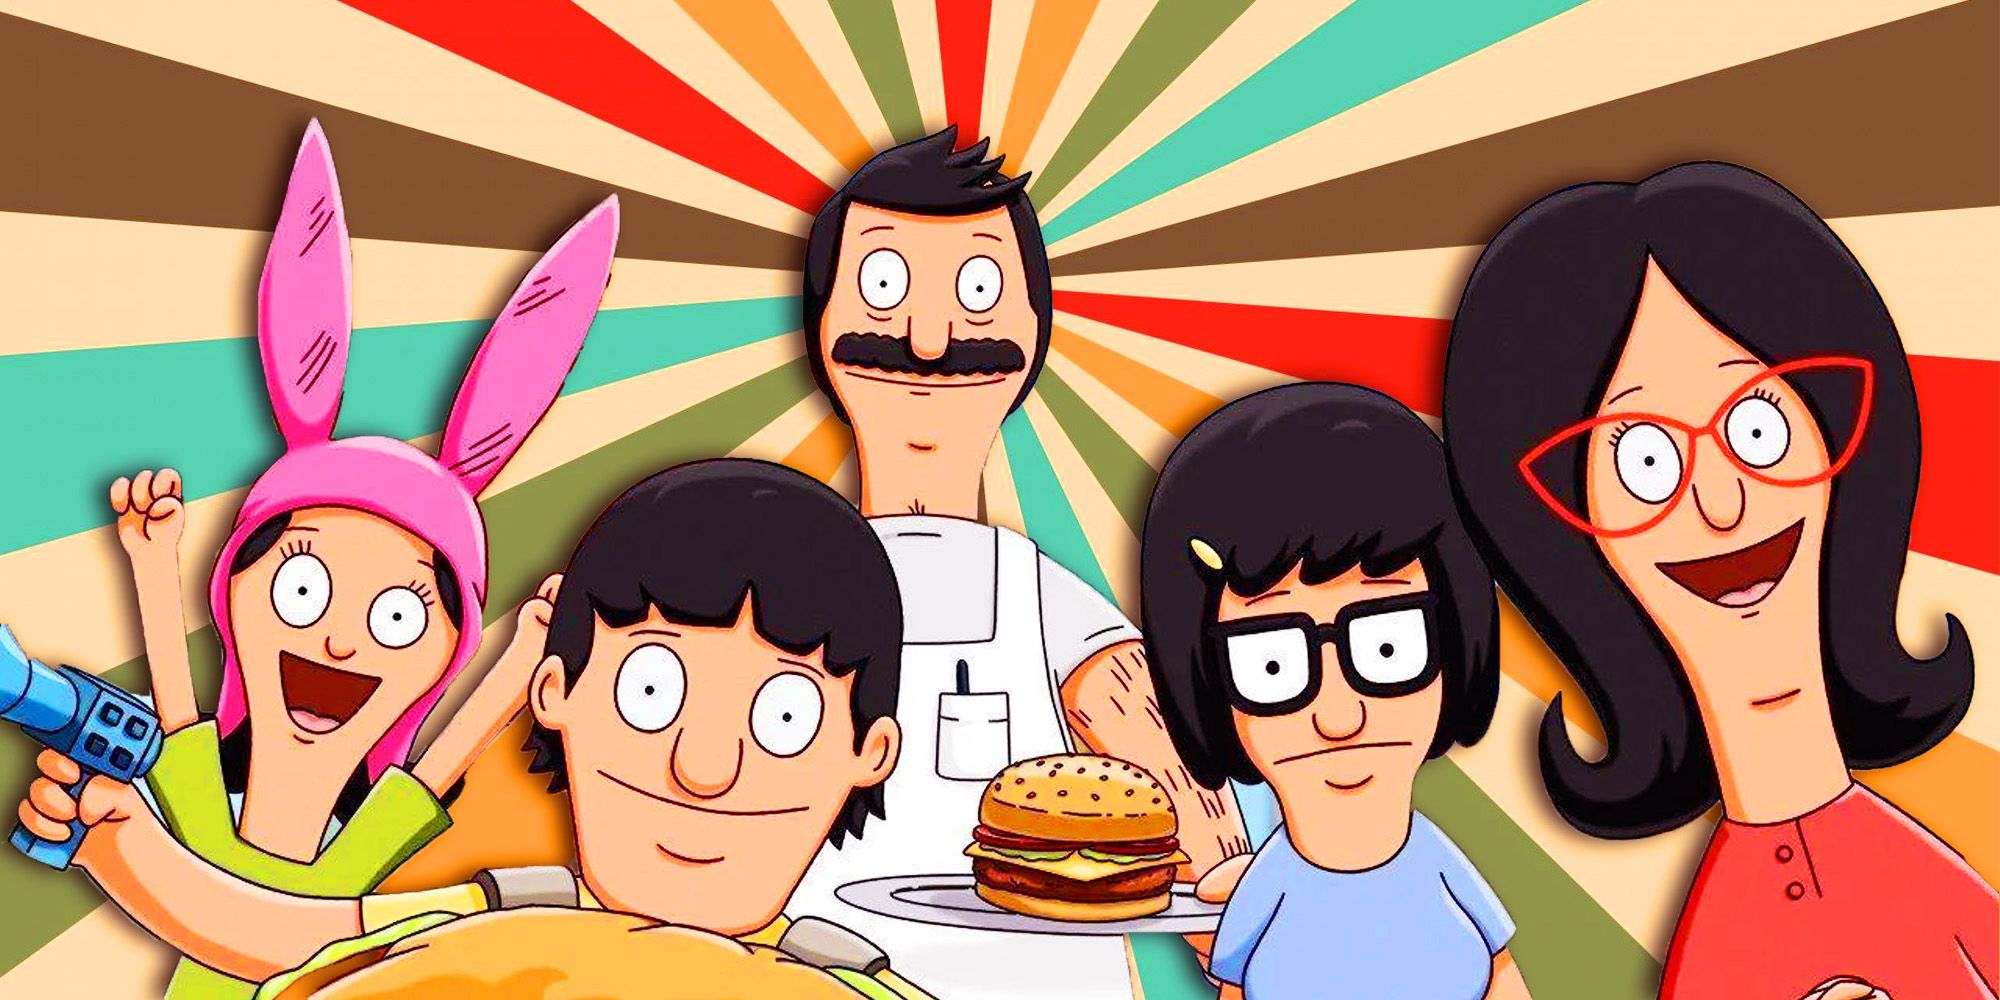 bobs-burgers-theory-characters-not-age-painting